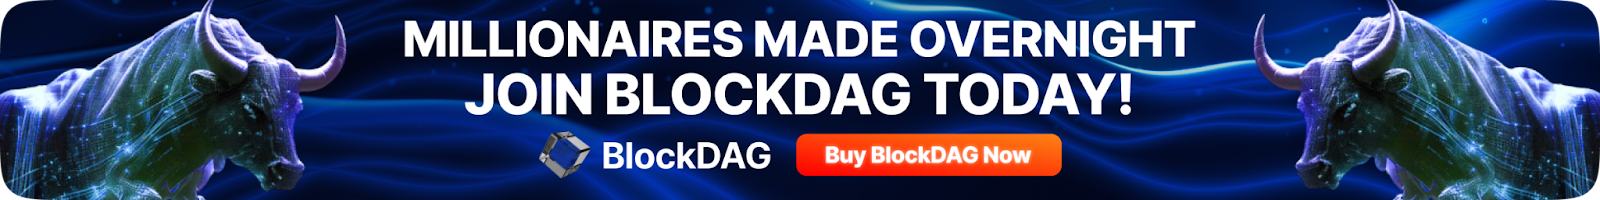 Can BlockDAG’s X30 Miner Earn You $12,000 Daily? ETC Targets Peaks & IMX Faces Market Whirlwind